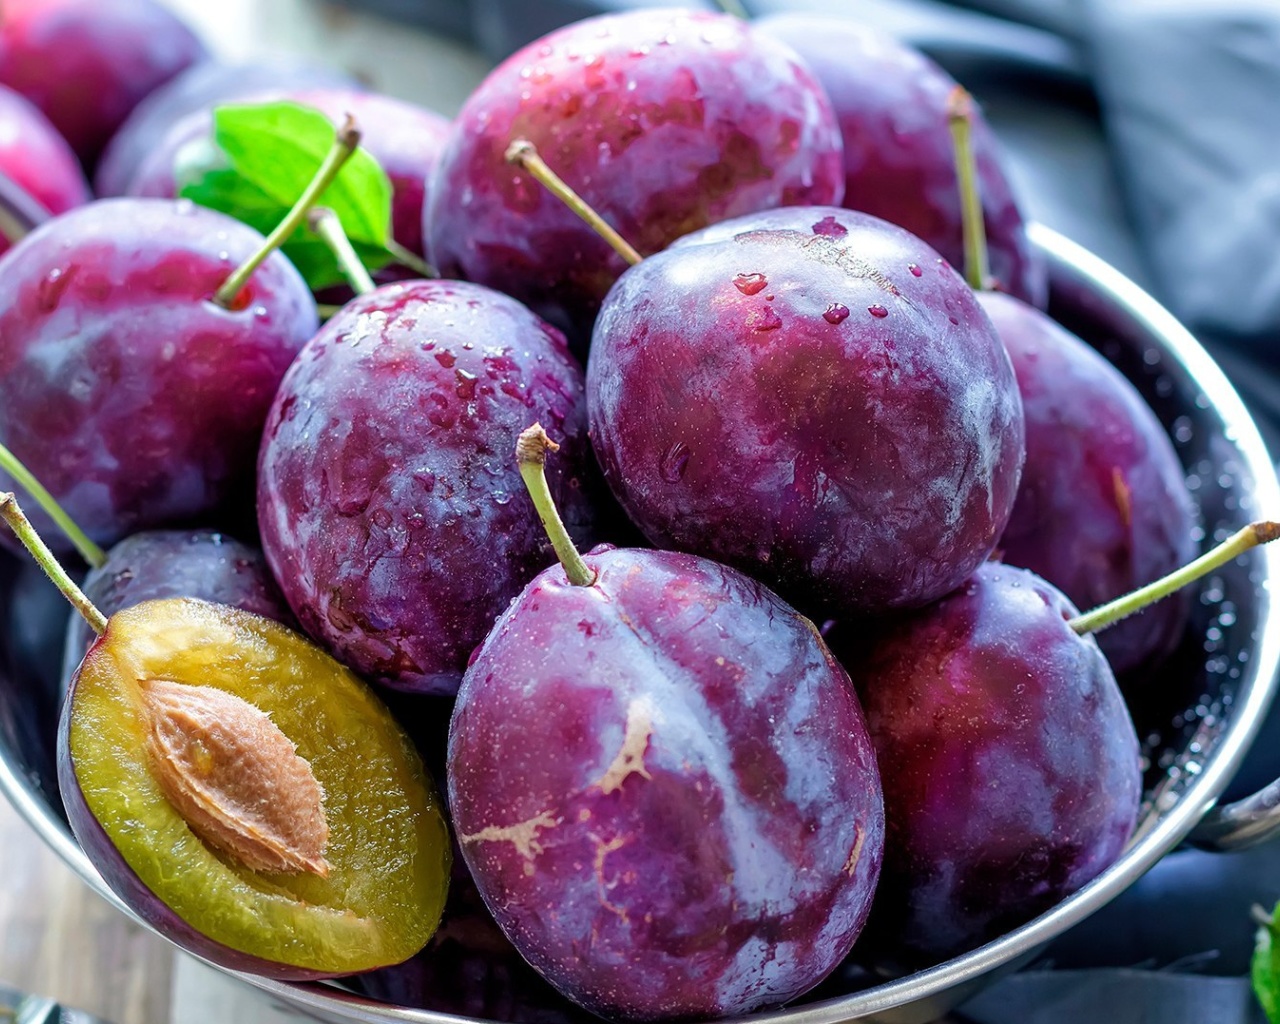 Plums with Vitamins wallpaper 1280x1024